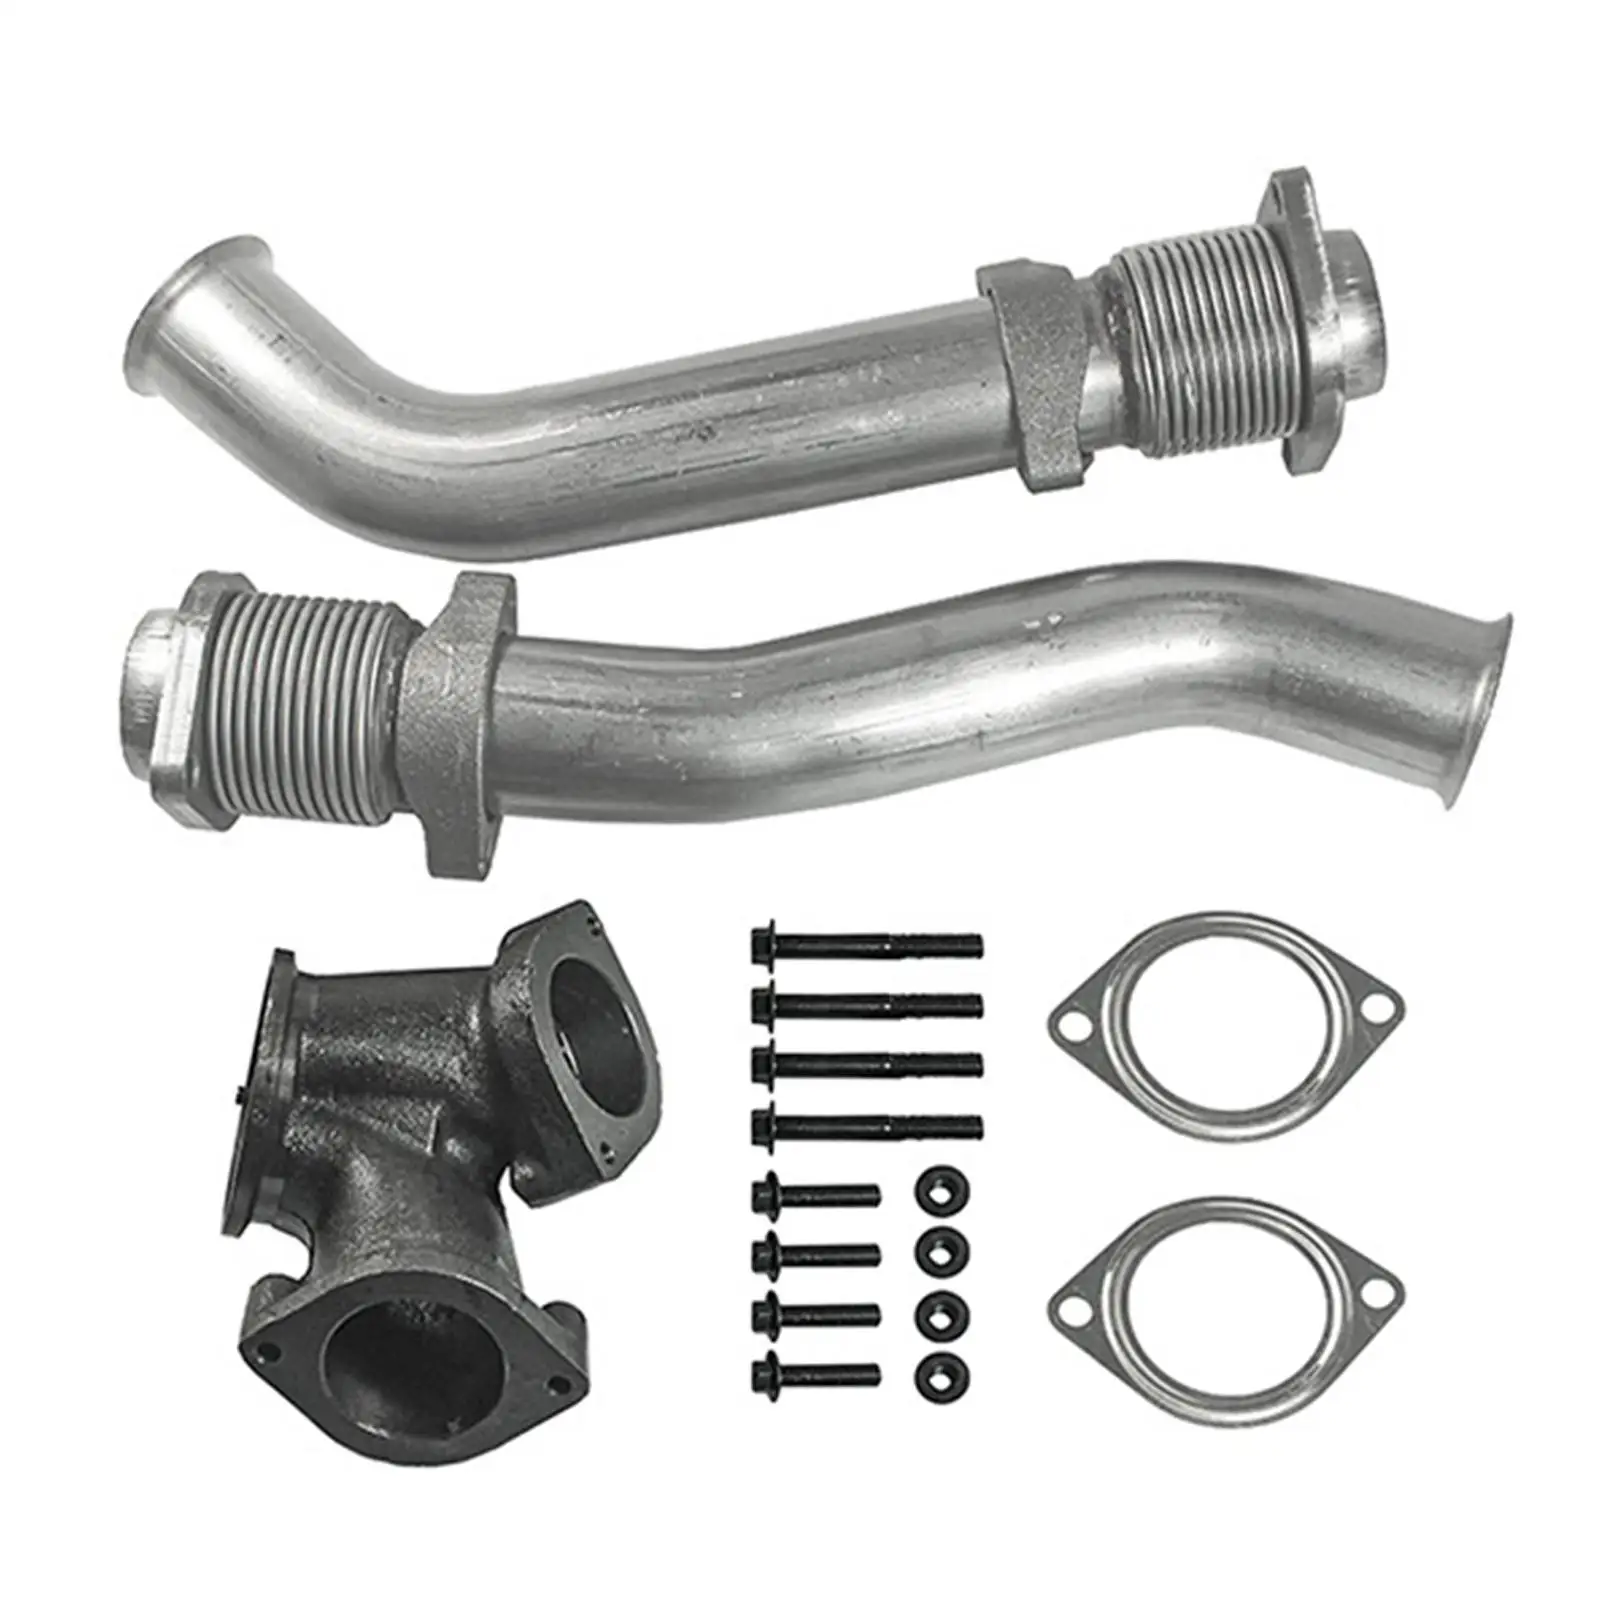 Turbocharger up Pipe Kit 679-005 Car Accessory for Ford F-250 F-450